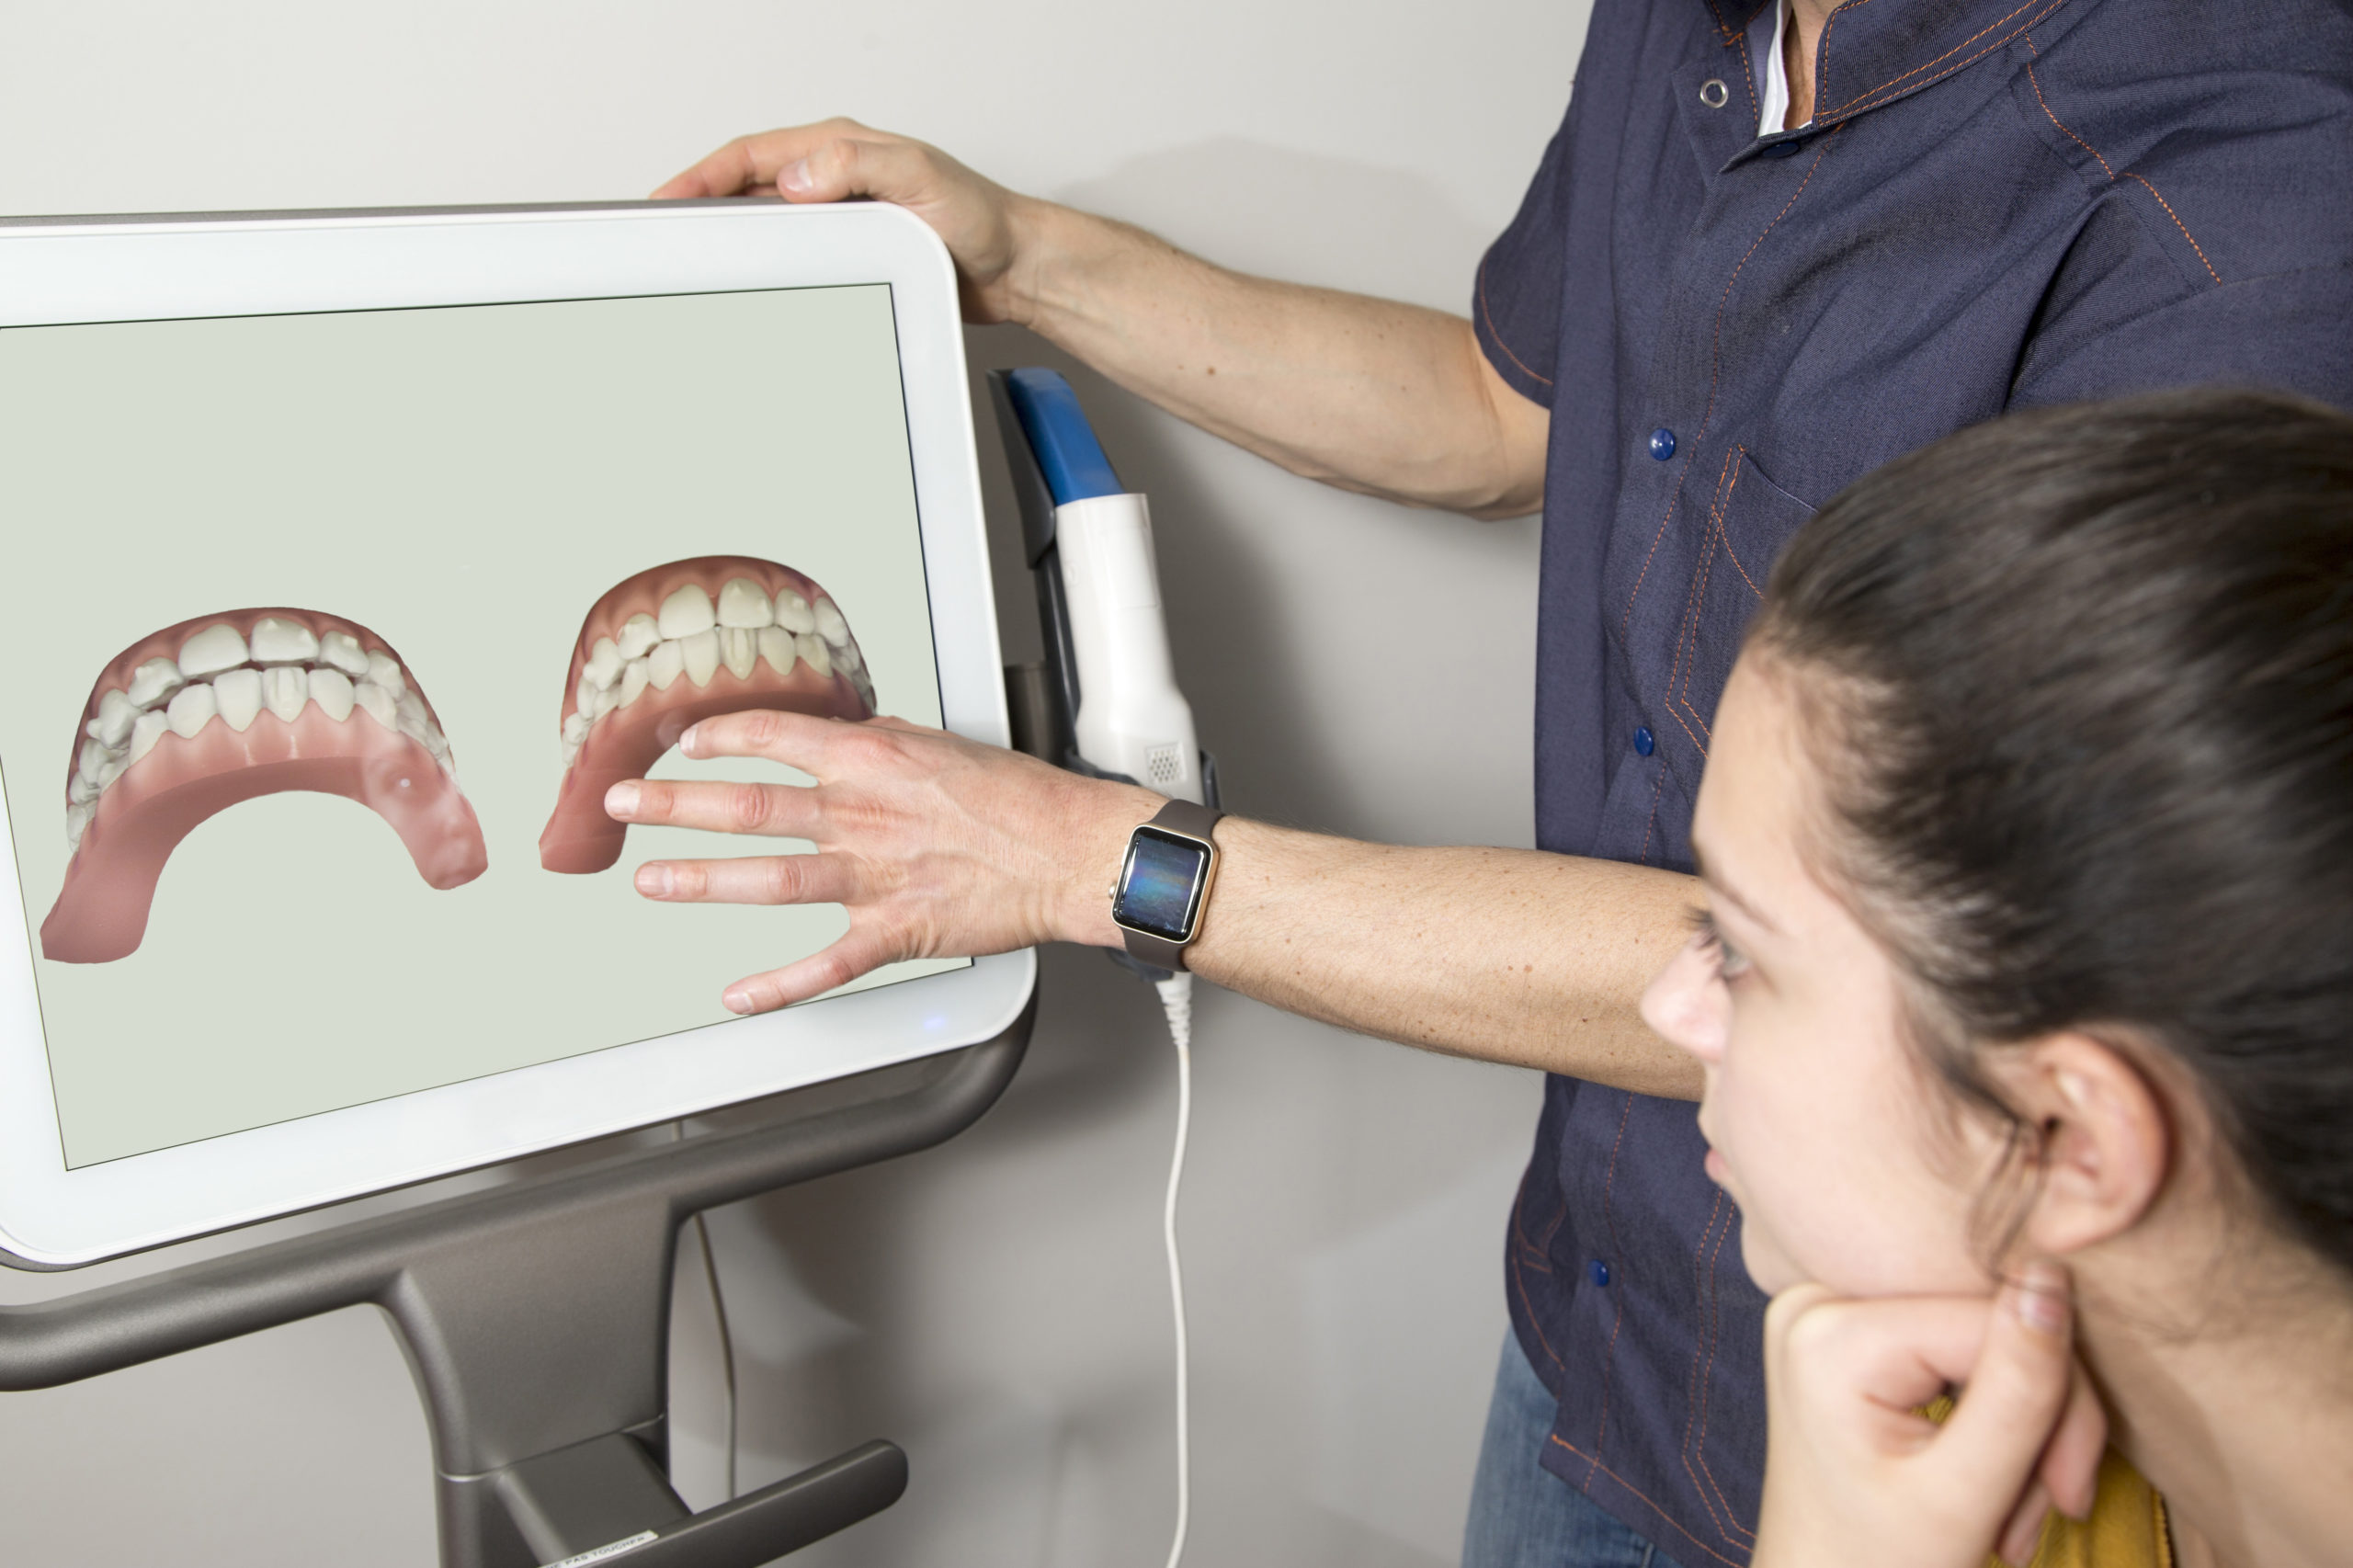 orthodontist questions from screen monitoring